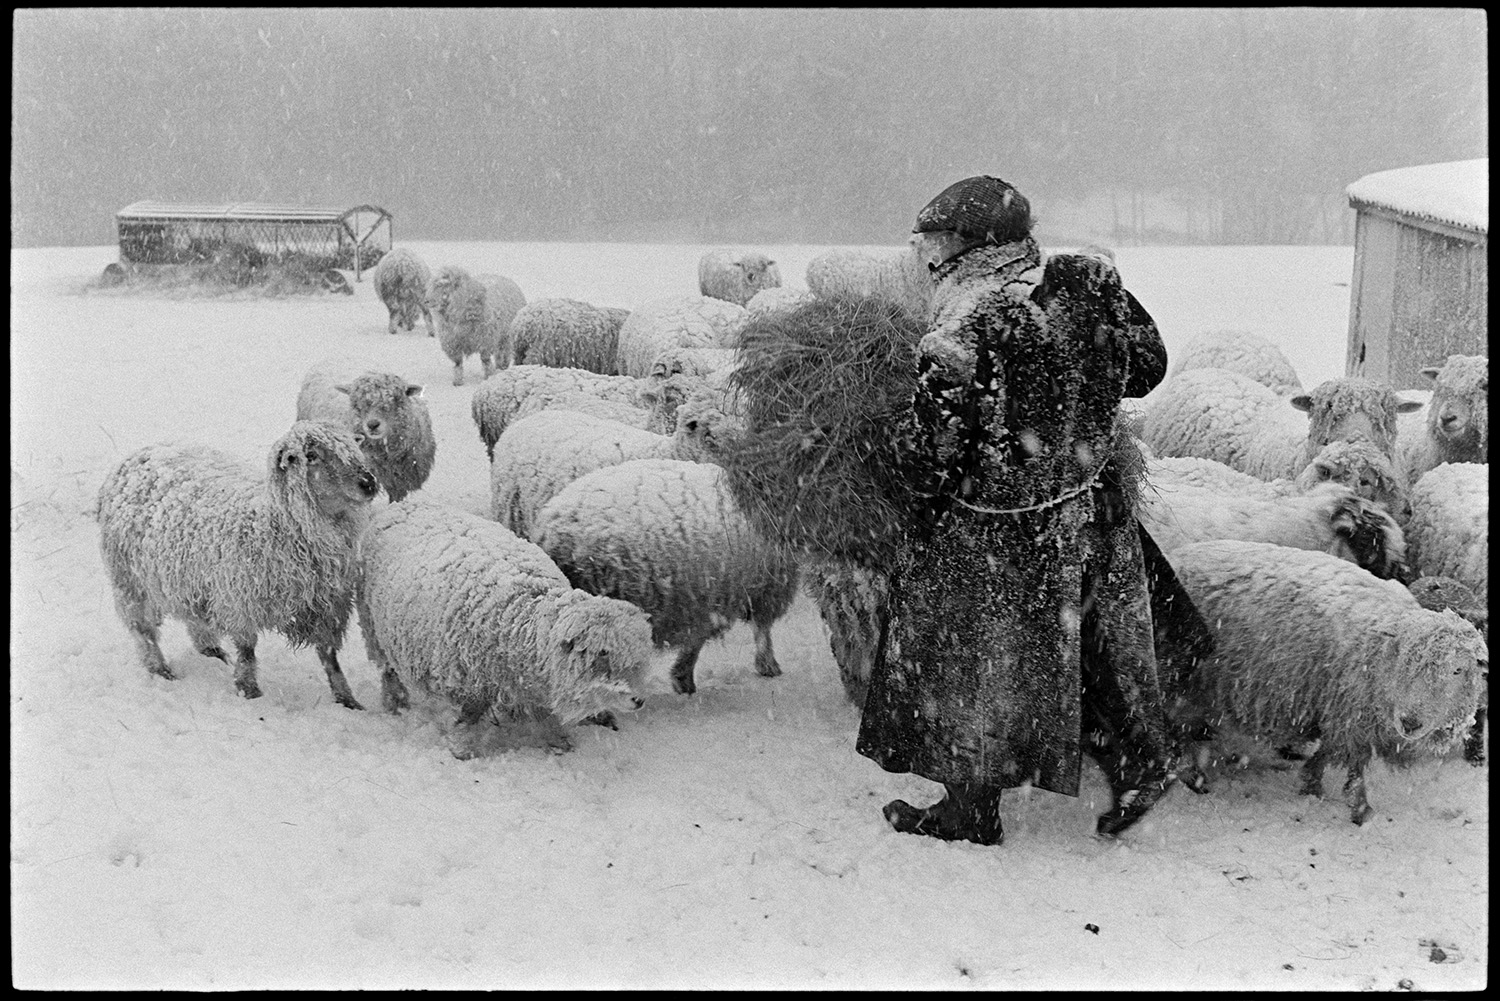 Snow, farmer feeding sheep in blizzard. 
[Ivor Brock feeding hay to sheep in a snow covered field and blizzard at Millhams, Dolton. A hay rack and wooden shed can be seen in the background.]